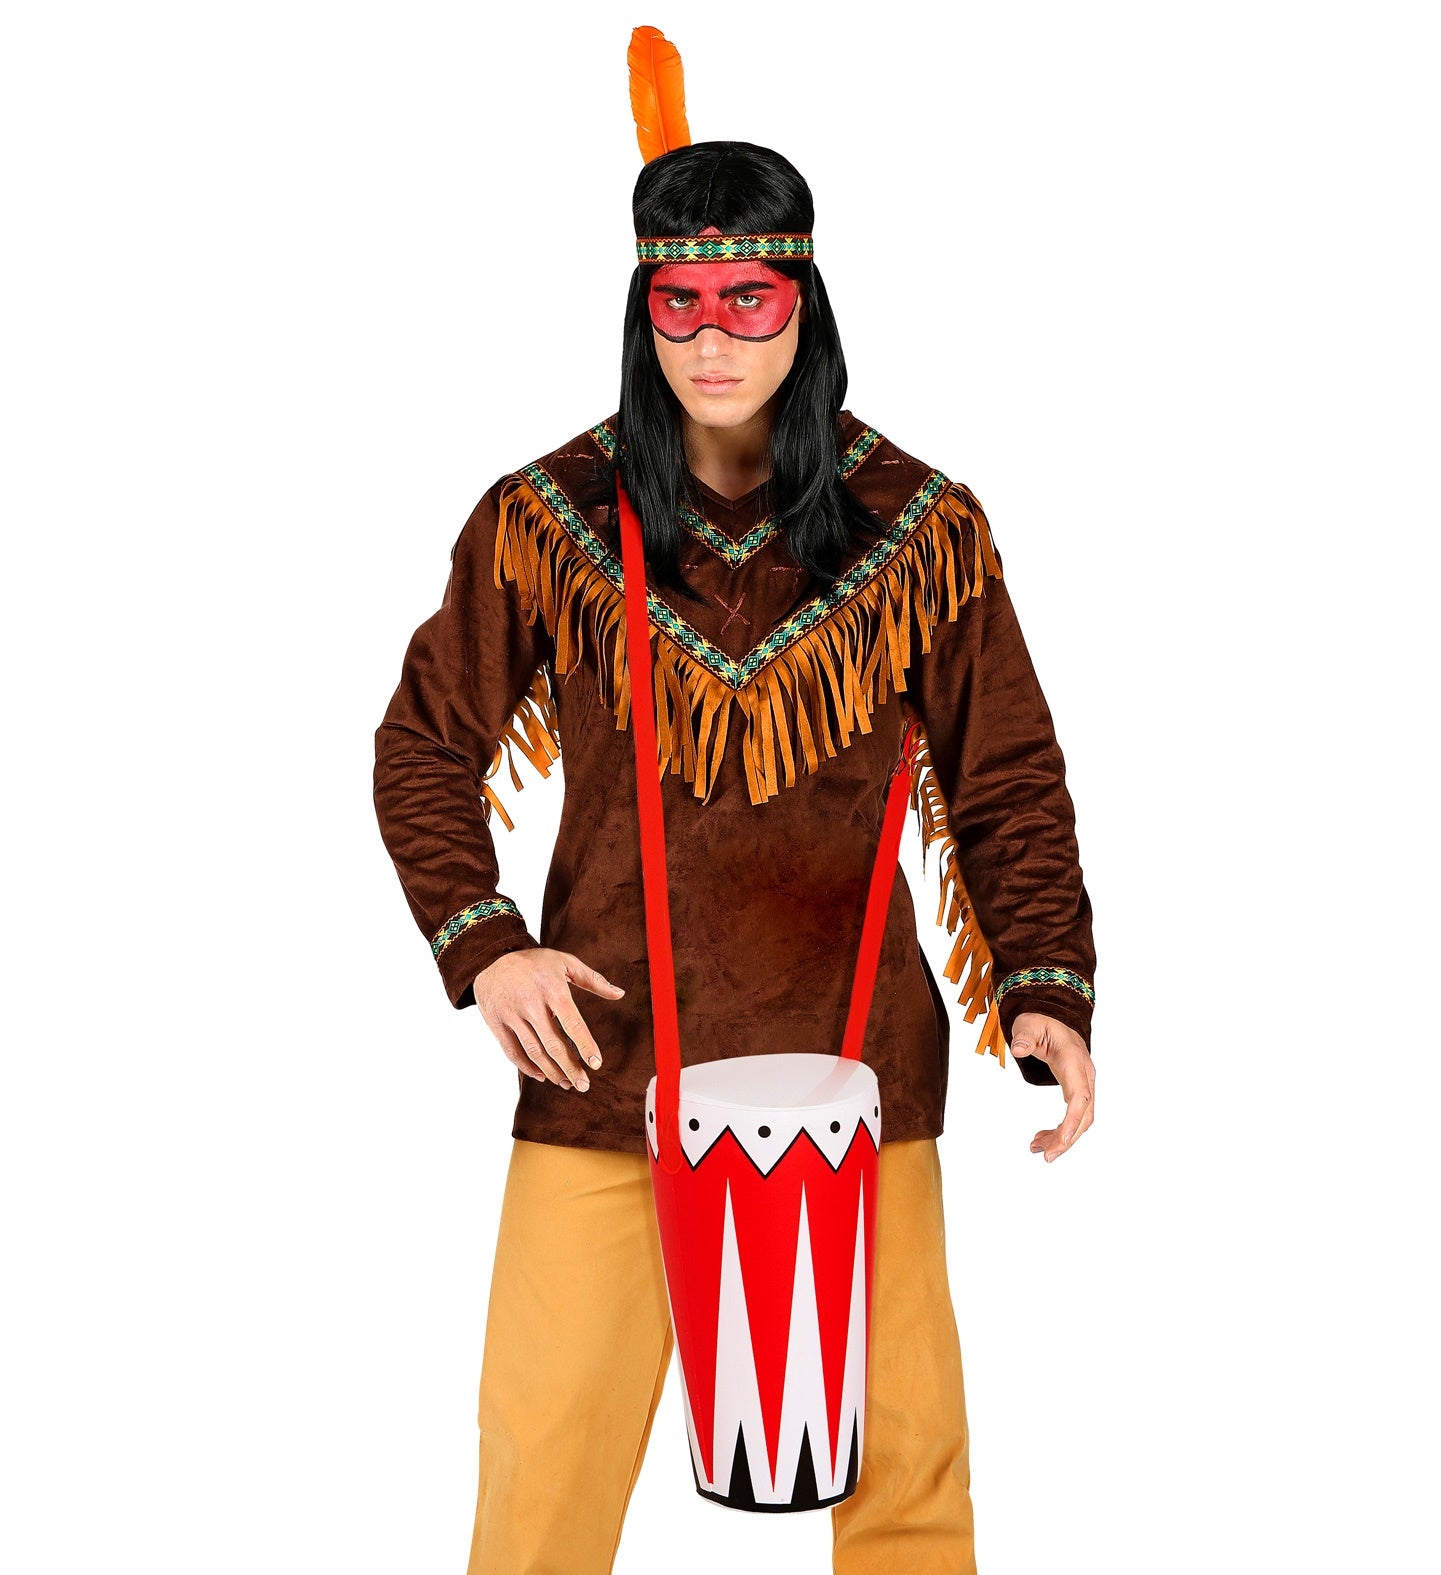 Inflatable Drum costume accessory